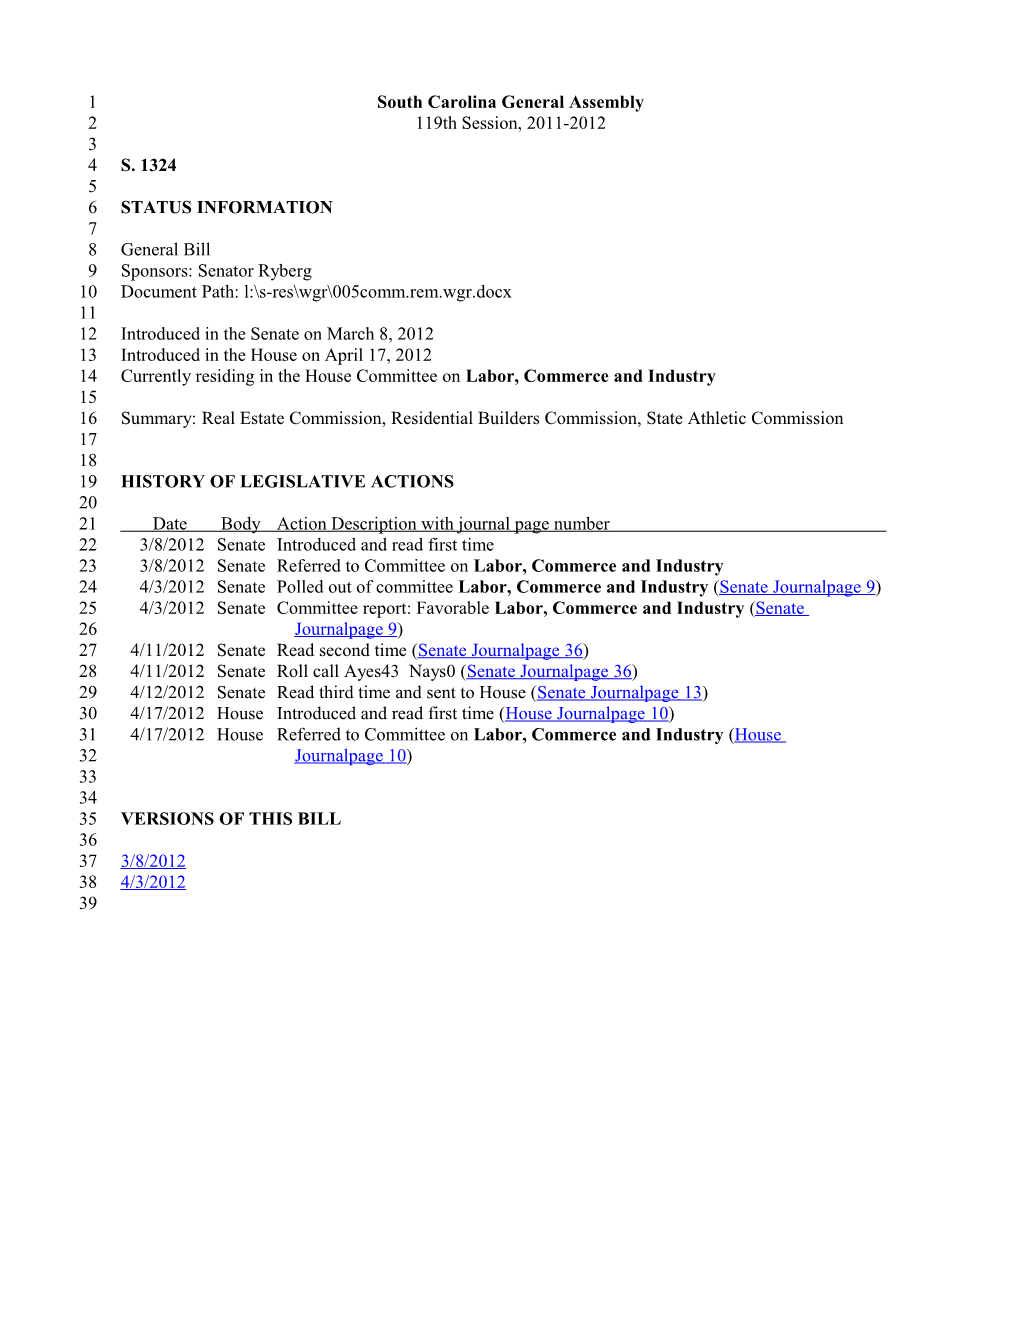 2011-2012 Bill 1324: Real Estate Commission, Residential Builders Commission, State Athletic